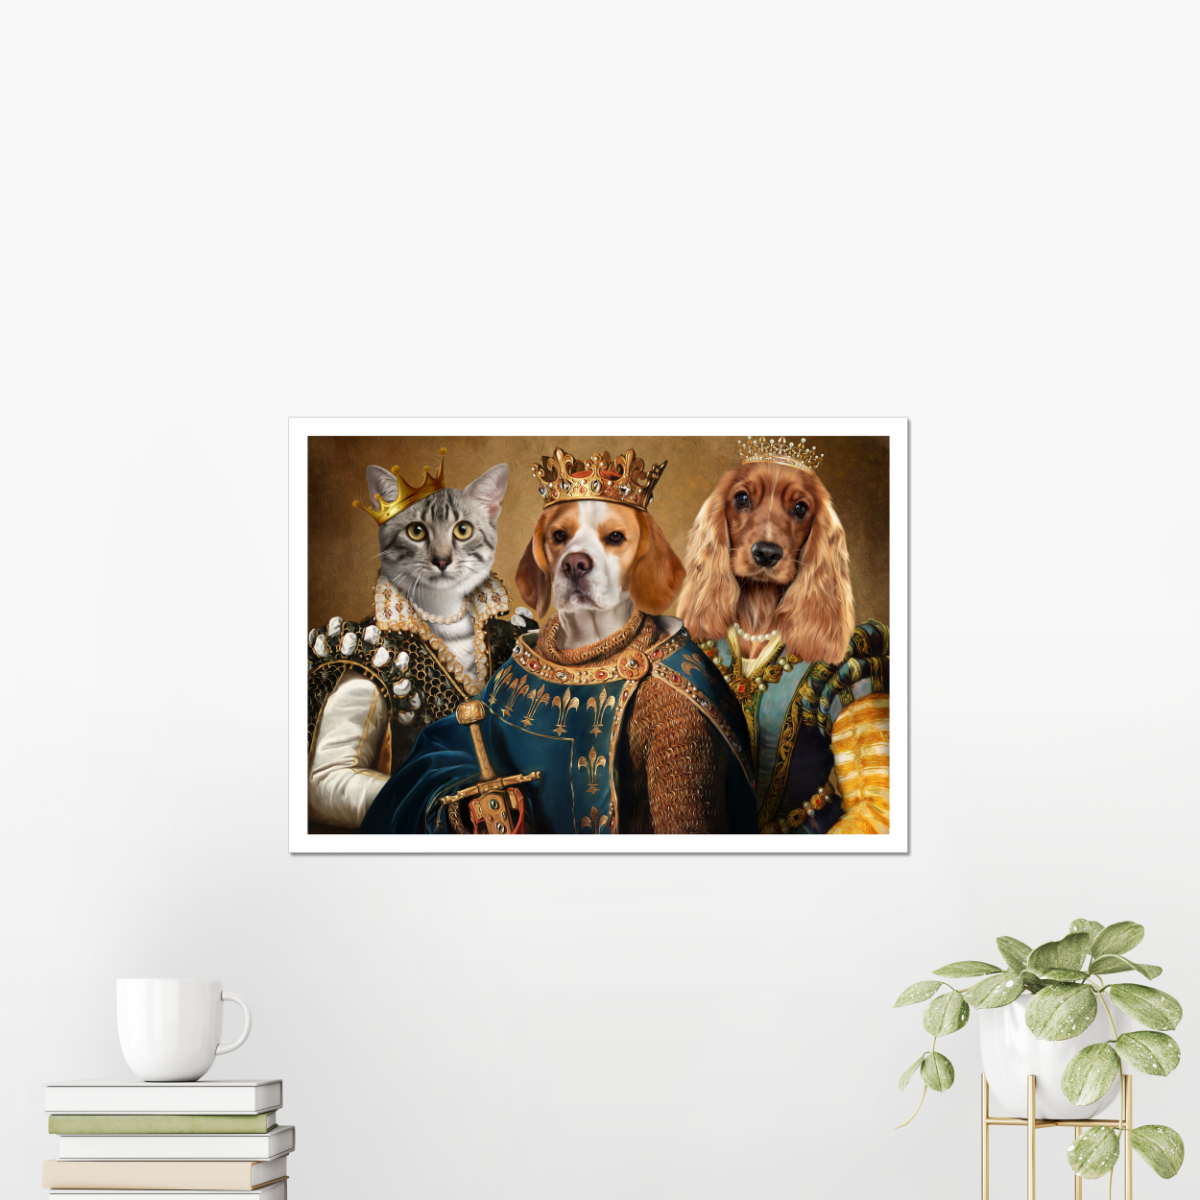 The Royals: Custom 3 Pet Poster - Paw & Glory - #pet portraits# - #dog portraits# - #pet portraits uk#Paw & Glory, pawandglory, pet portraits in oils, cat picture painting, cat picture painting, hogwarts dog houses, best dog artists, digital pet paintings, pet portraits